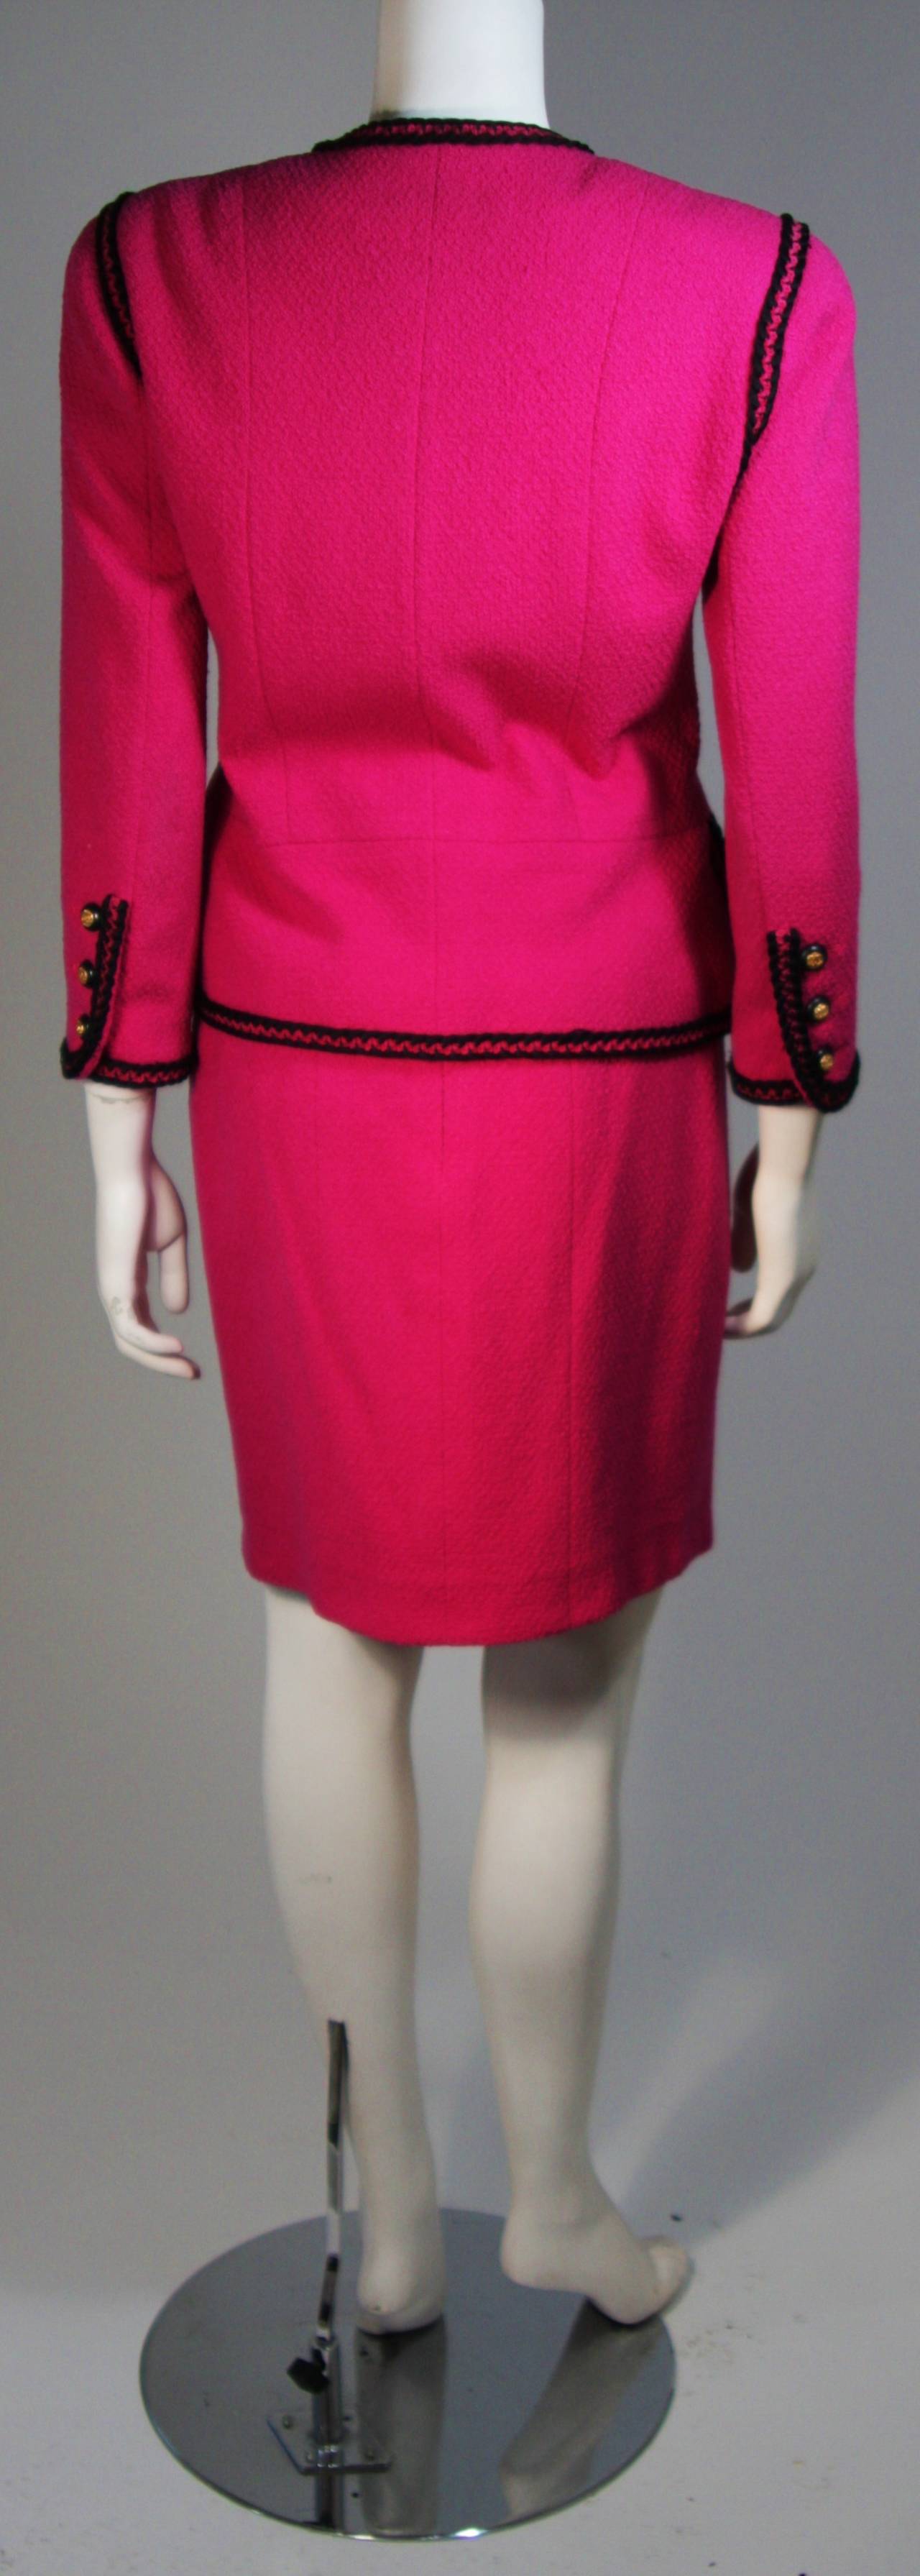 CHANEL 1980's Wool Fuschia Skirt Suit with Black Trim Size 38 1